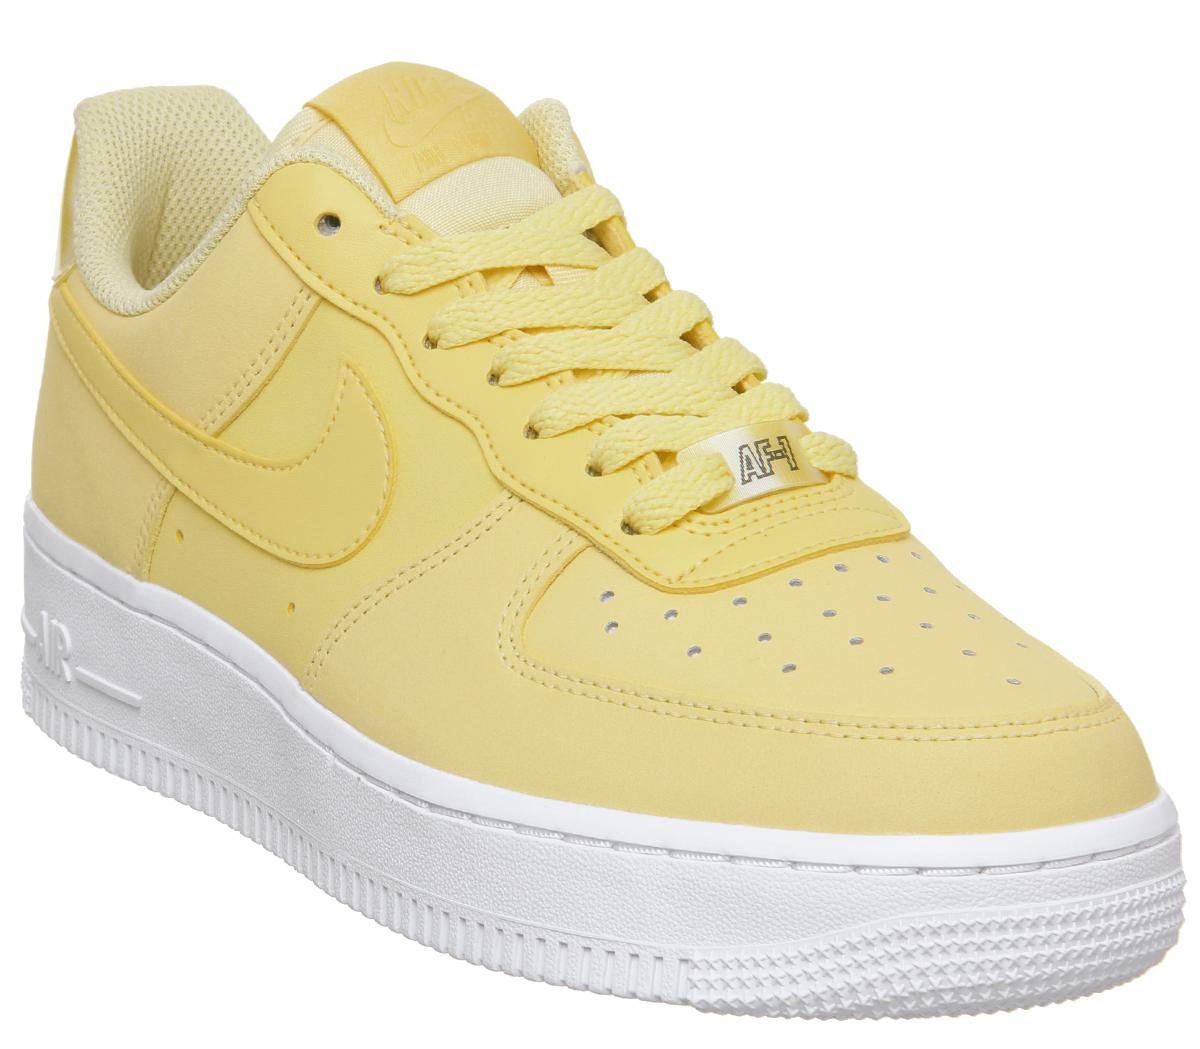 Nike Air Force 1 07 Trainers Bicycle 